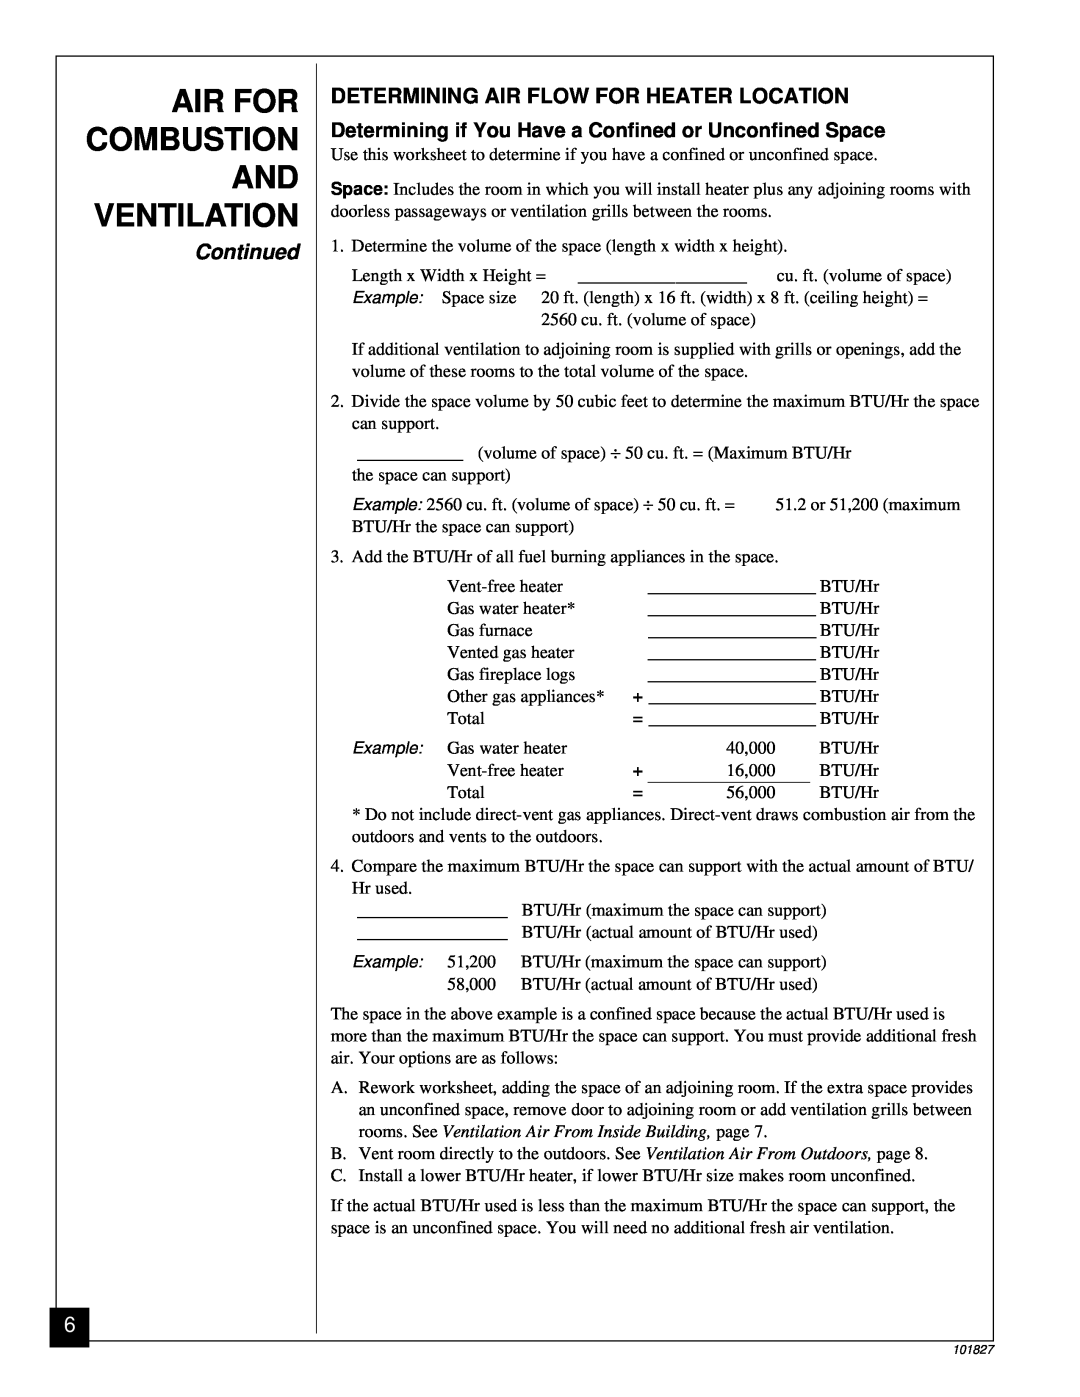 Desa CGP16RA, CGP26D Air For Combustion And Ventilation, Continued, Determining Air Flow For Heater Location 